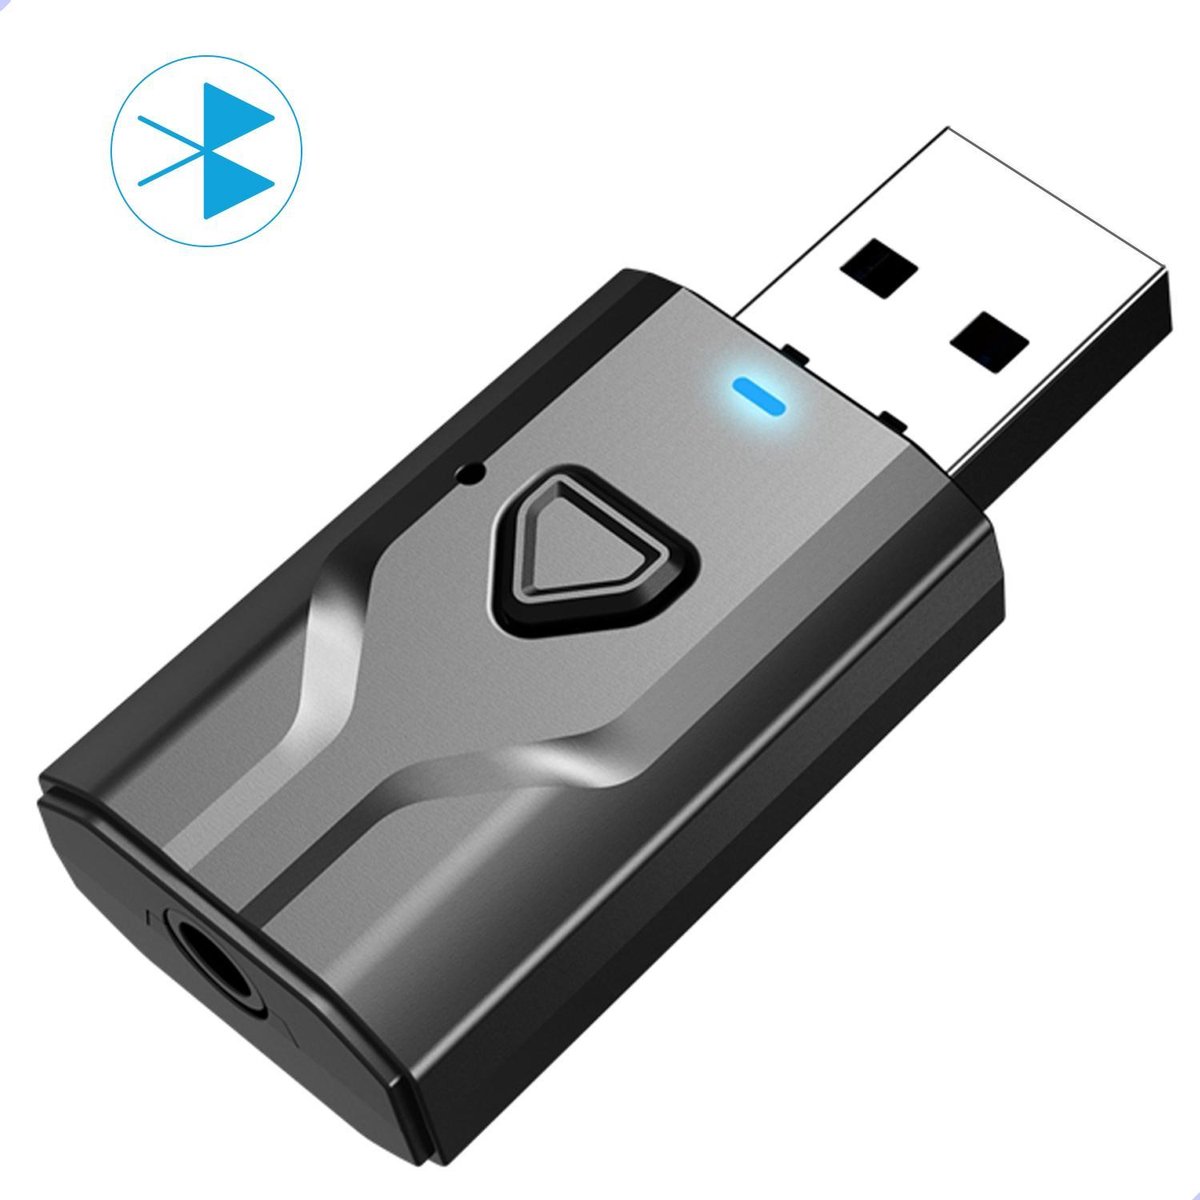 2 In 1 USB Bluetooth Transmitter & Receiver - Zender en Ontvanger - Bluetooth 5.0 - 15 Meter Bereik - bluetooth dongle - Bluetooth Adapter & Receiver - Eye For Solutions